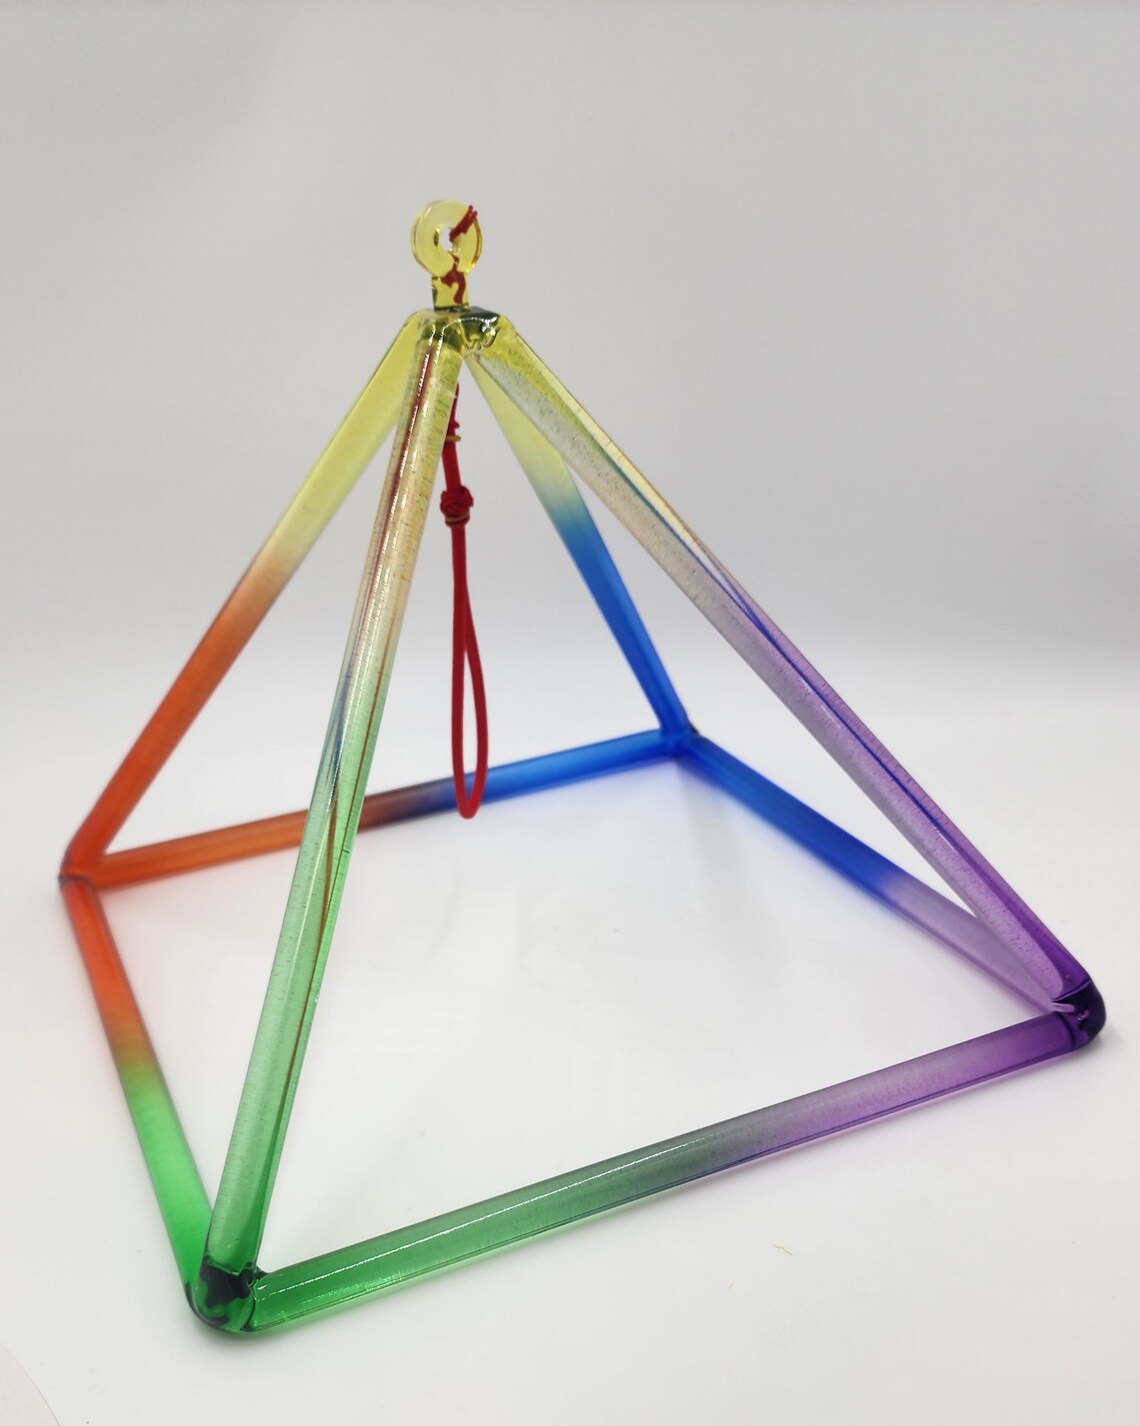 10" Rainbow Quartz Crystal Singing Pyramid Sound Healing Musical Instrument with Secure Travel Case and Suede Striker